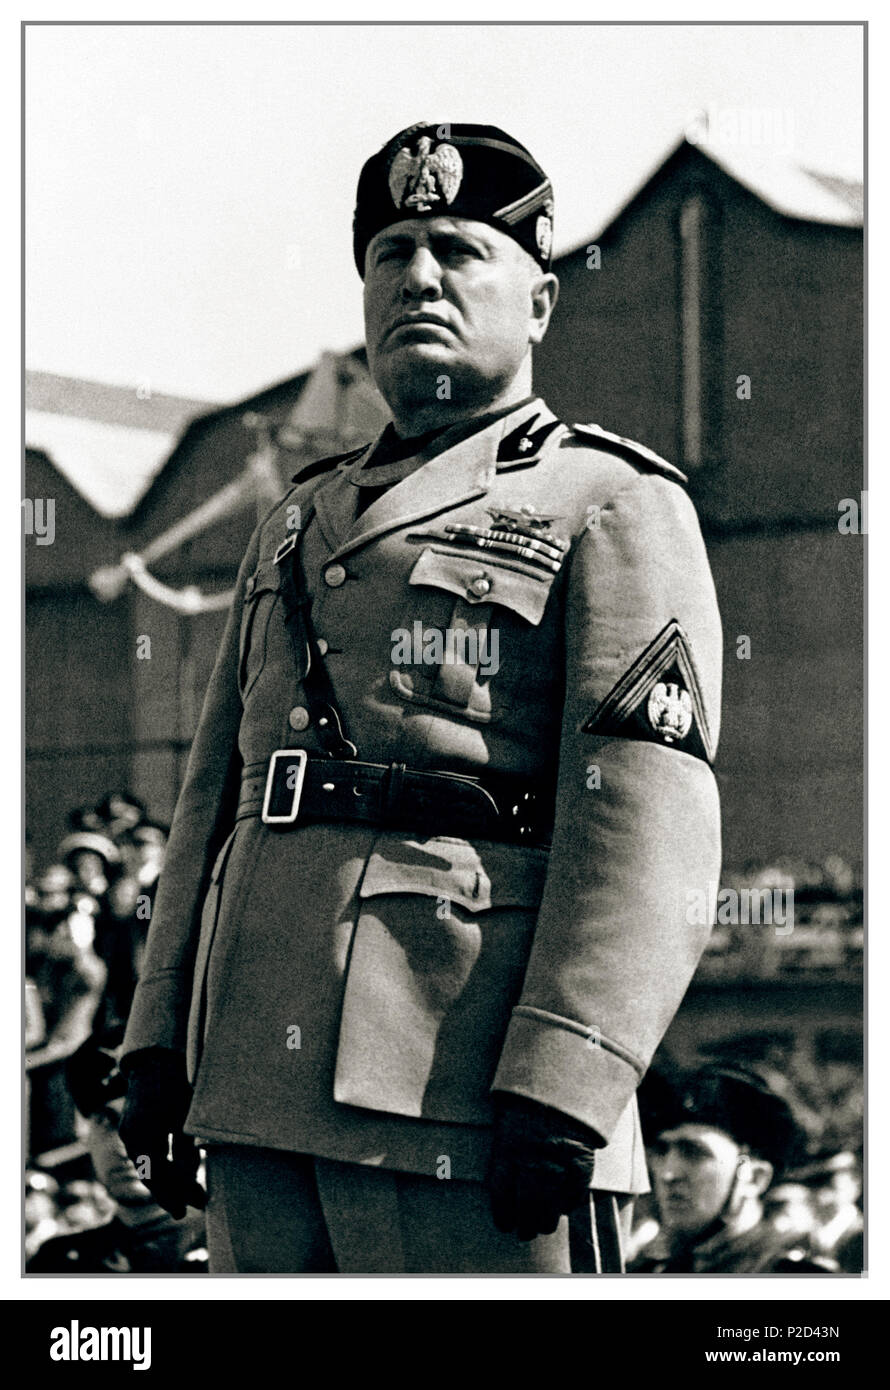 MUSSOLINI UNIFORM PODIUM Vintage WW2 image of Benito Amilcare Andrea Mussolini IL DUCE an Italian politician, journalist and the leader of the National Fascist party, ruling the country as a Prime Minister from 1922 to 1943 - Constitutionally until 1925 when he dropped all pretense of democracy and ruled as dictator. He made a crucial and fatal mistake of becoming part of the 'Axis of Evil' with Adolph Hitler In World War II Stock Photo